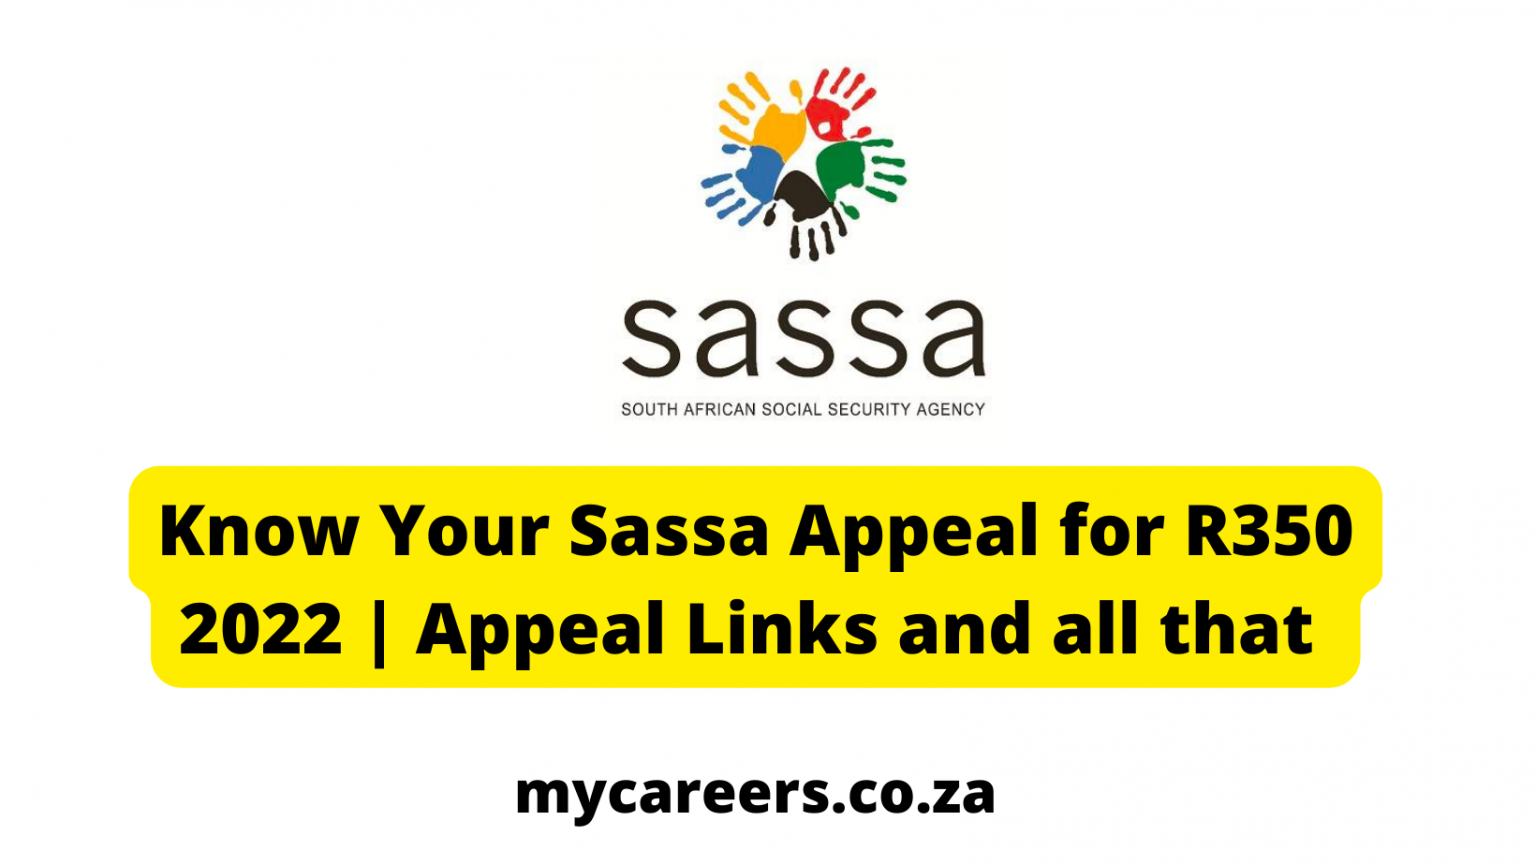 know-your-sassa-appeal-for-r350-2022-appeal-links-and-all-that